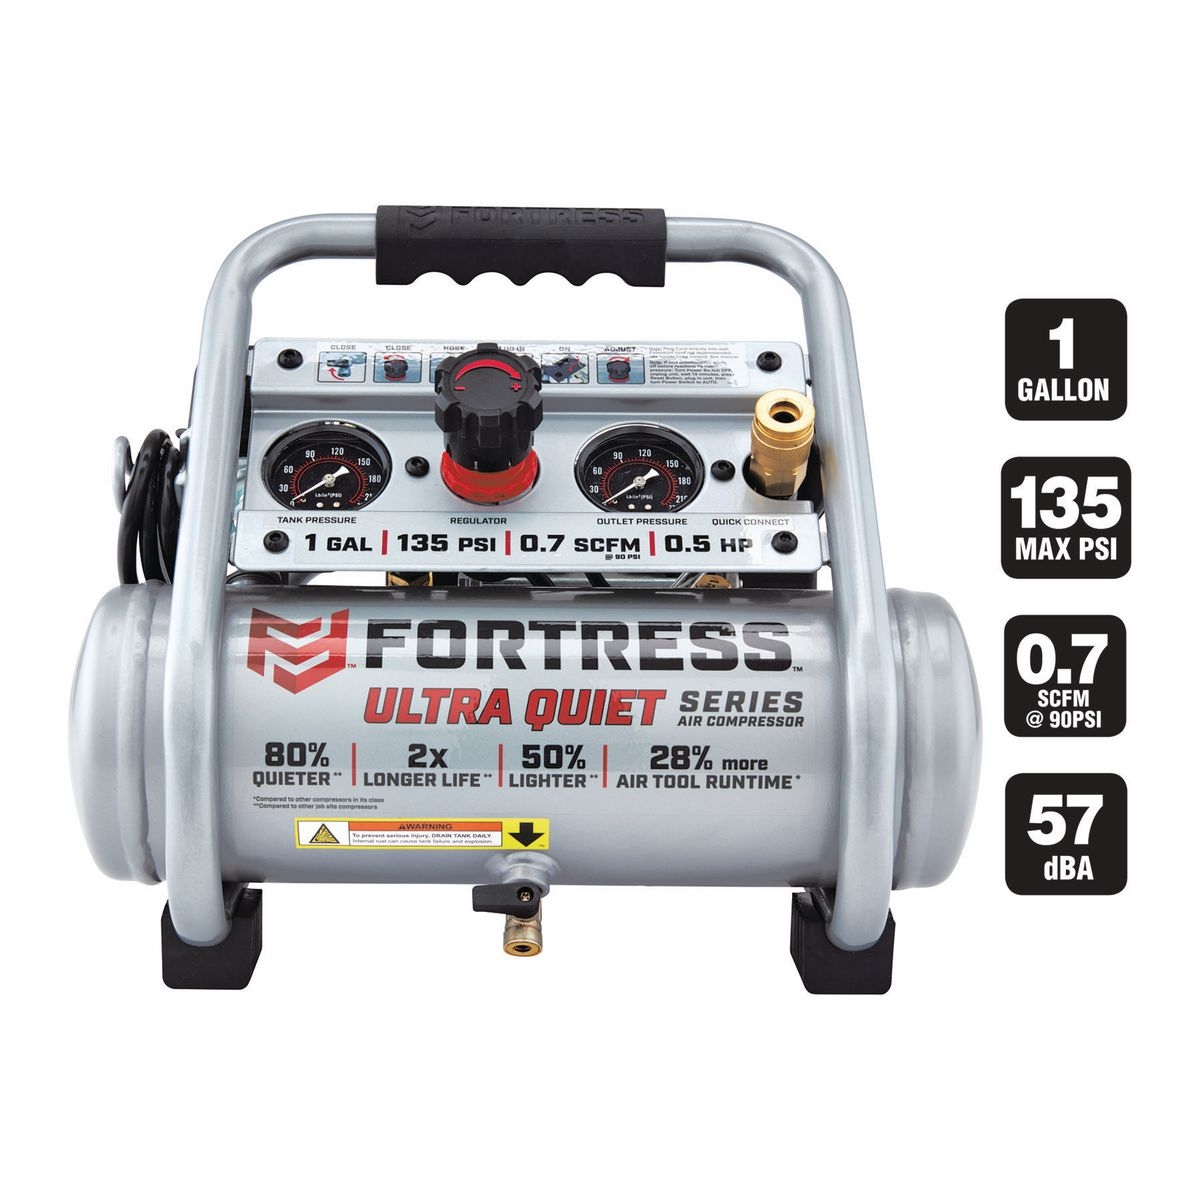 FORTRESS 1 Gallon 0.5 HP 135 PSI Ultra Quiet Oil-Free Professional Air